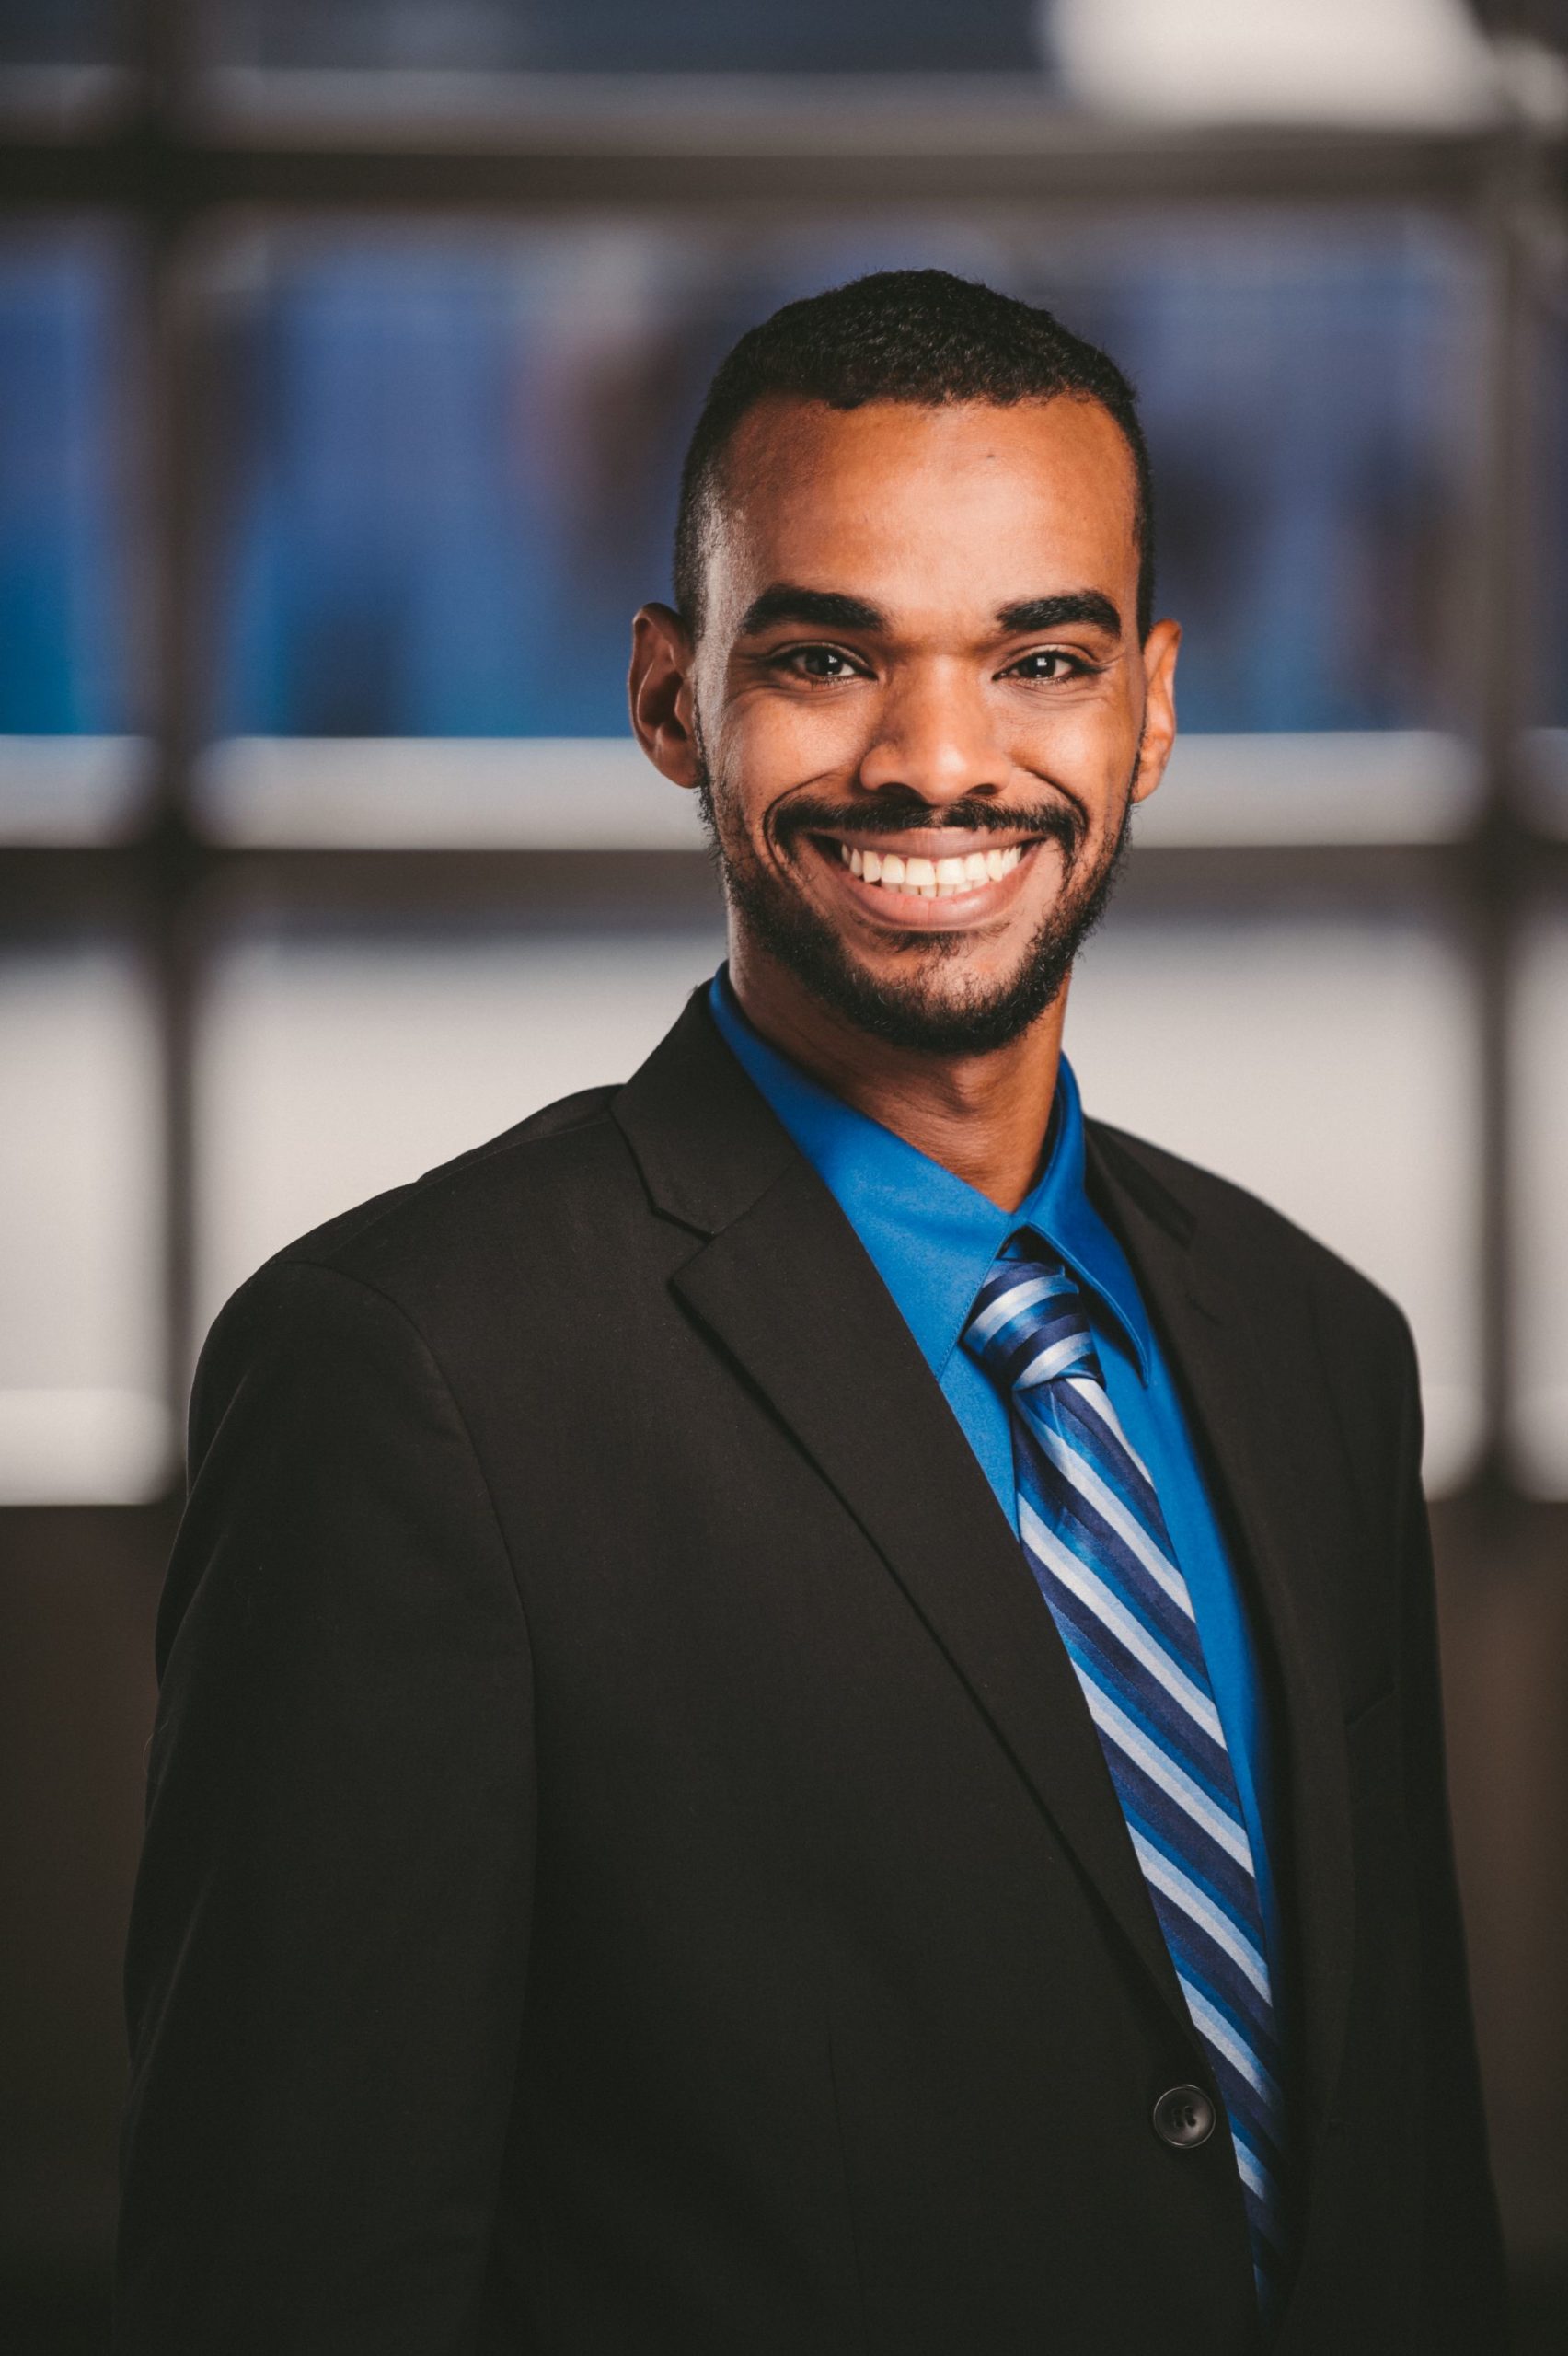 IU C&I Studios Portfolio Van Horn Law Group Head Shot of man smiling wearing a black suit with blue shirt and striped tie